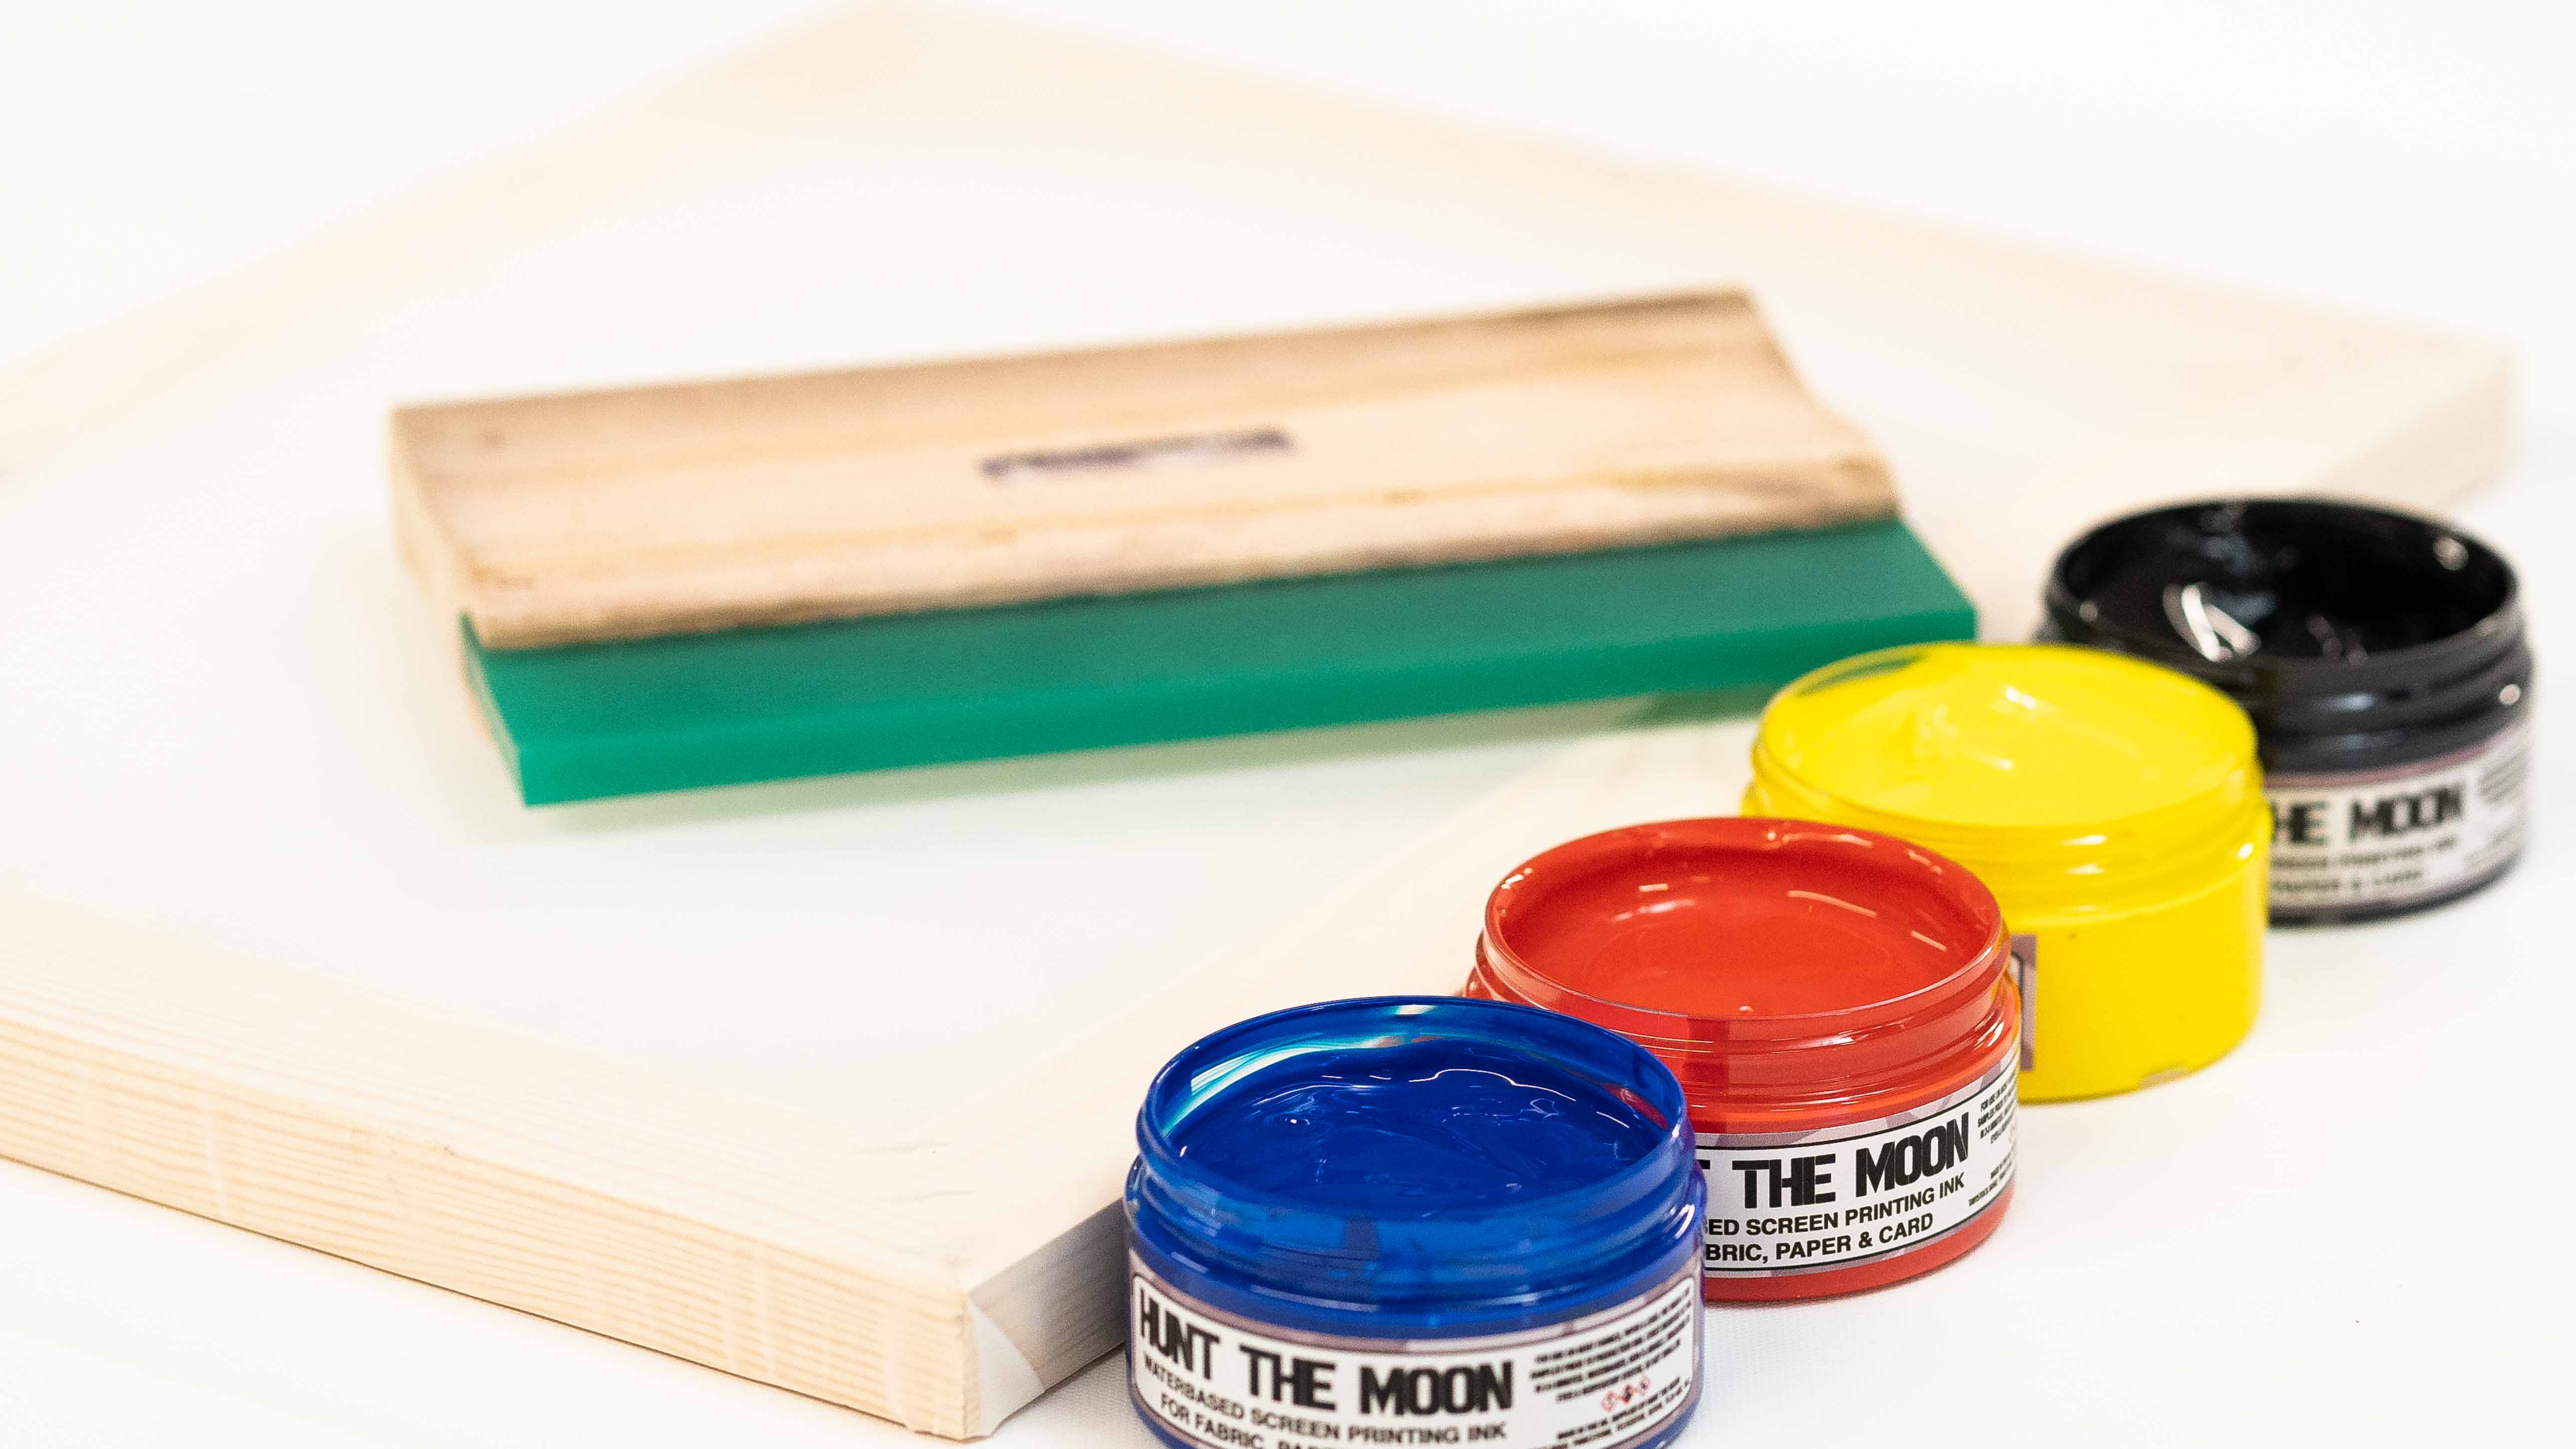 The best screen printing kits to you